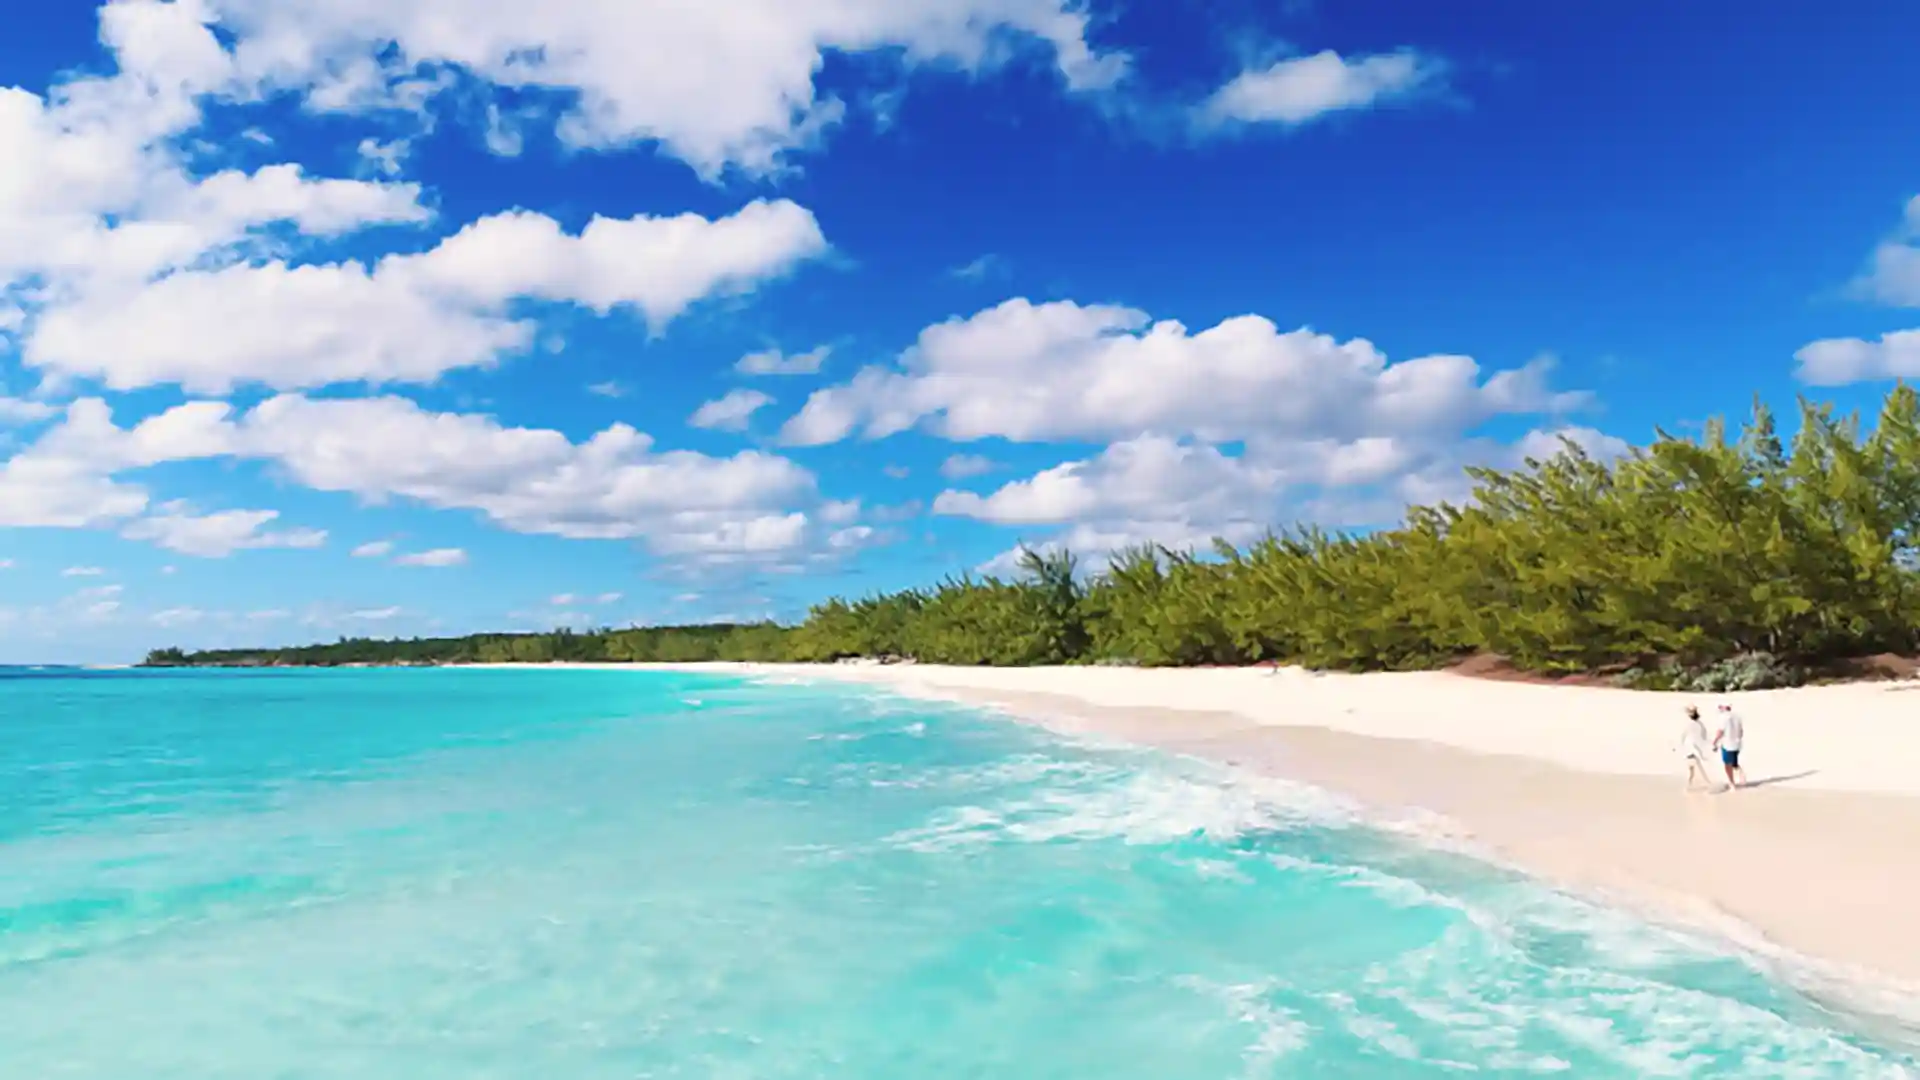 Post: Embark on Island-Hopping Adventures in the Caribbean